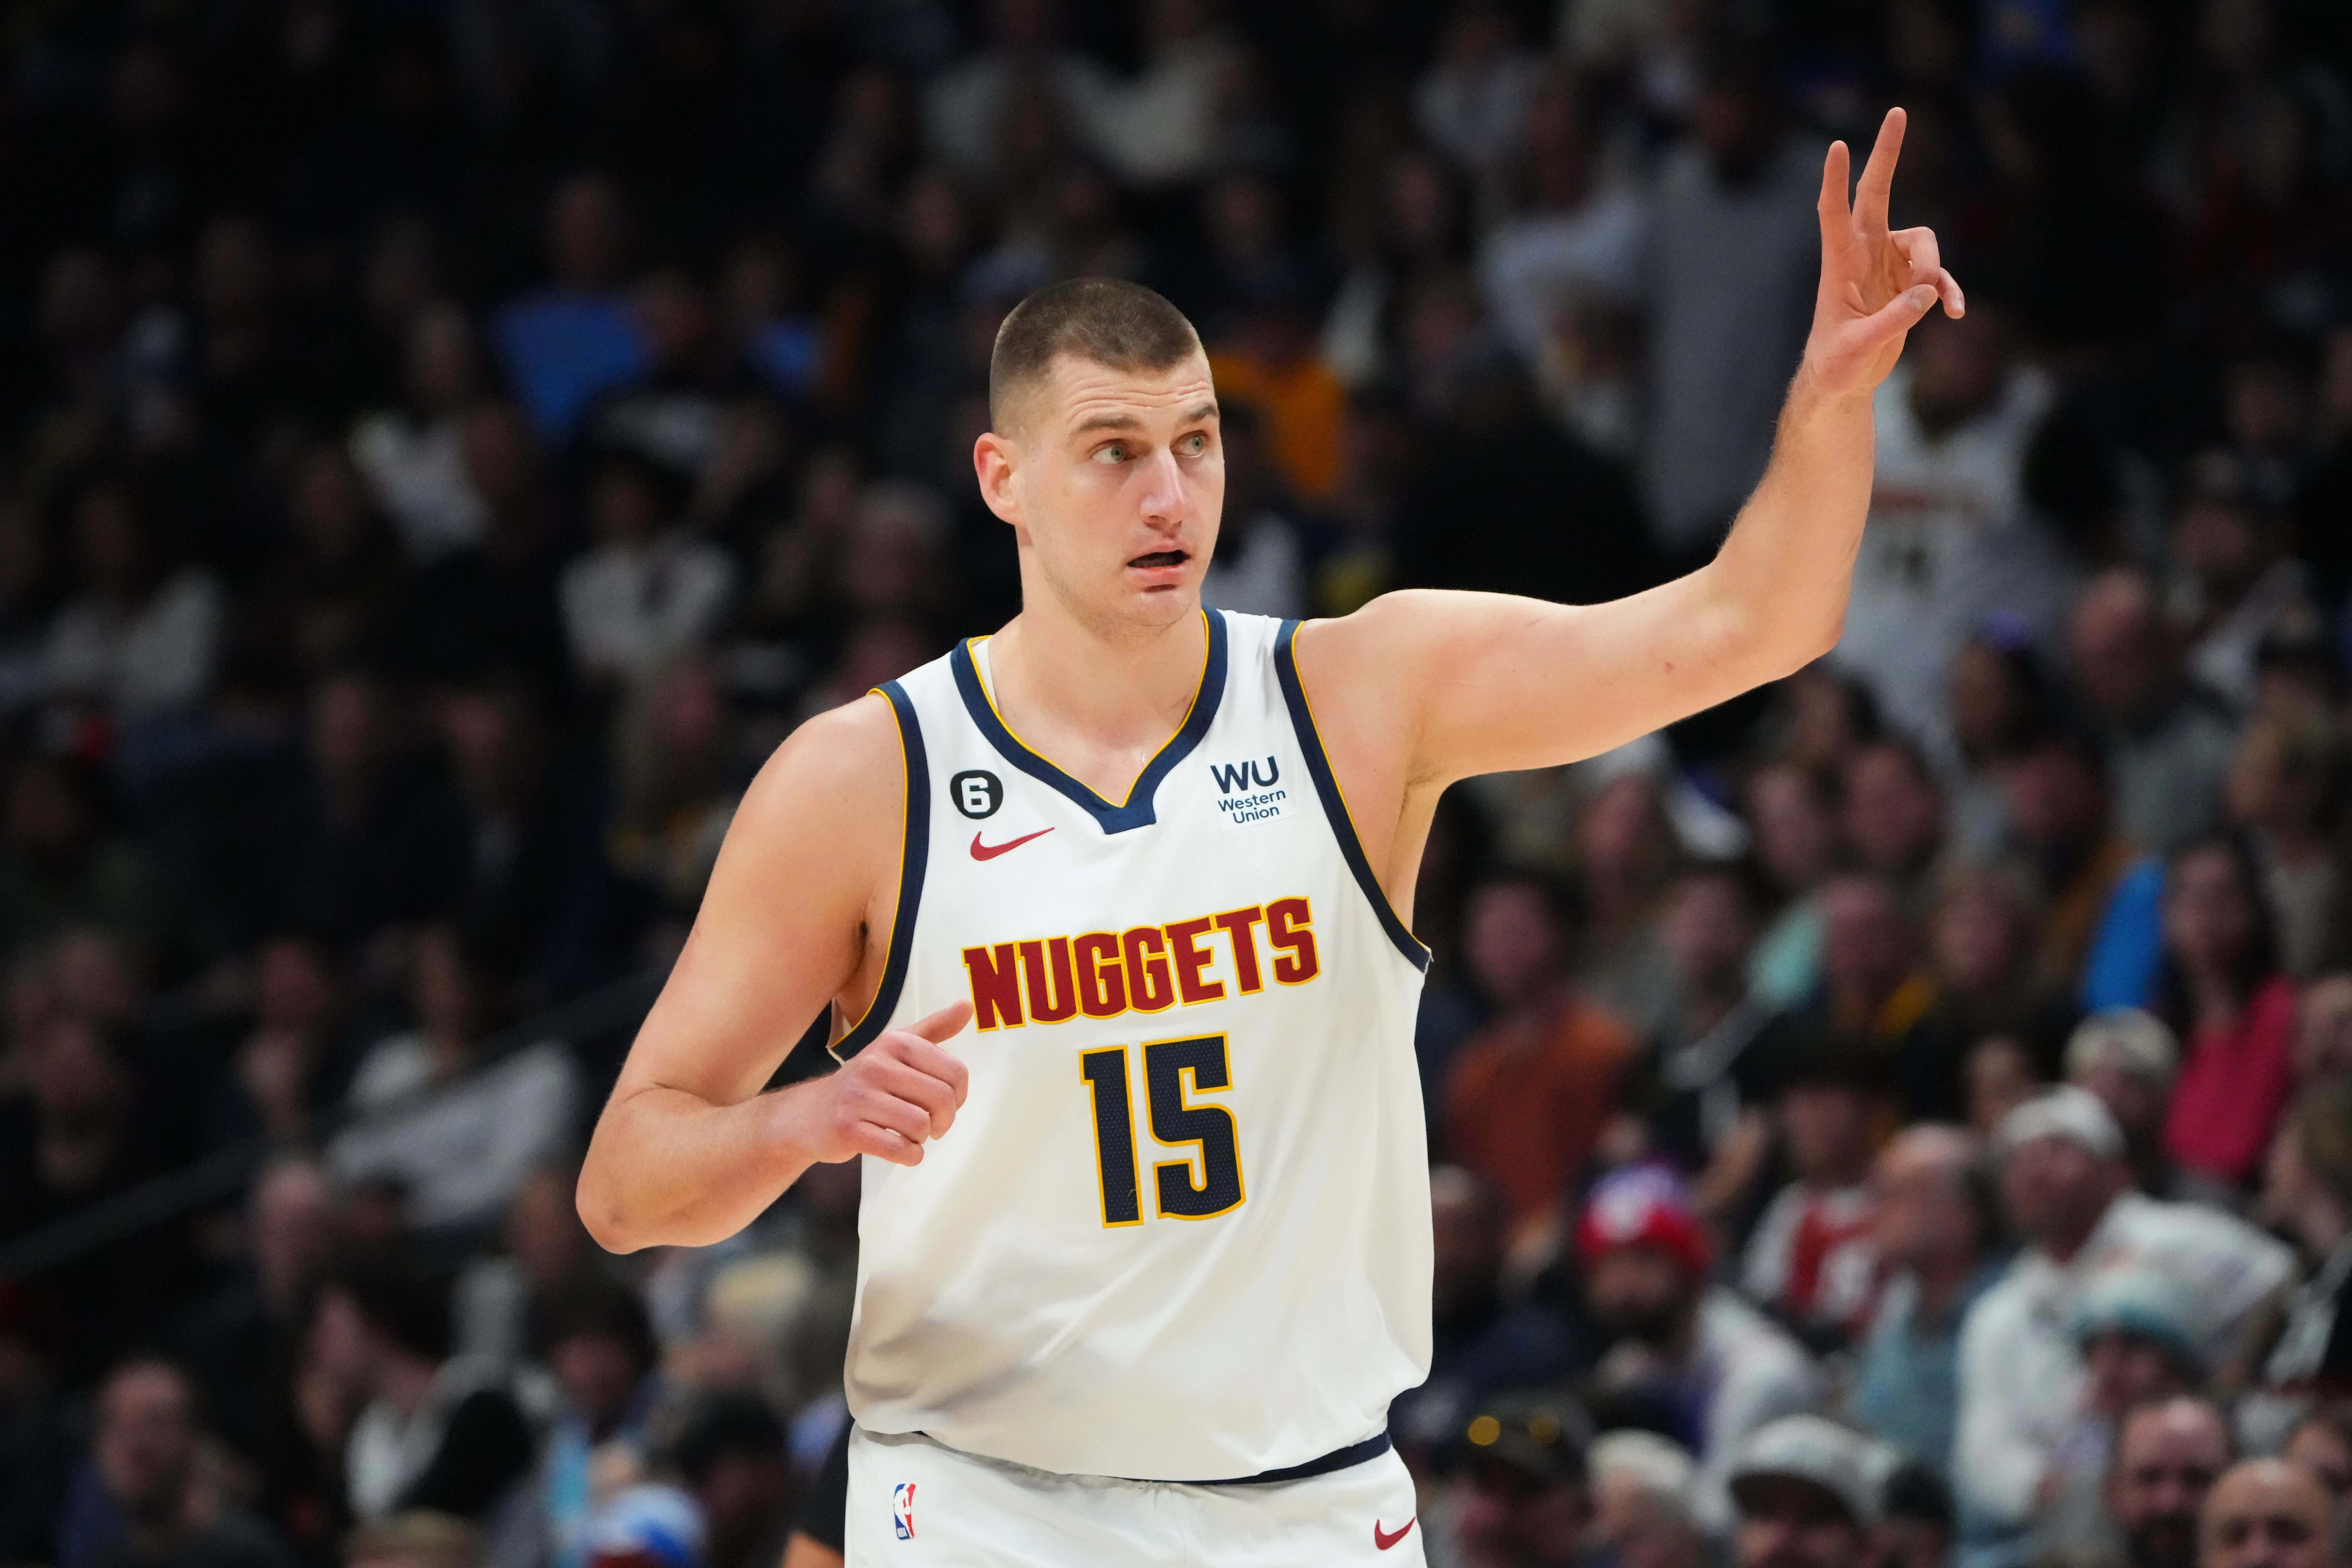 Denver Nuggets center Nikola Jokic (15) calls out in the first quarter against the Miami Heat at Ball Arena.